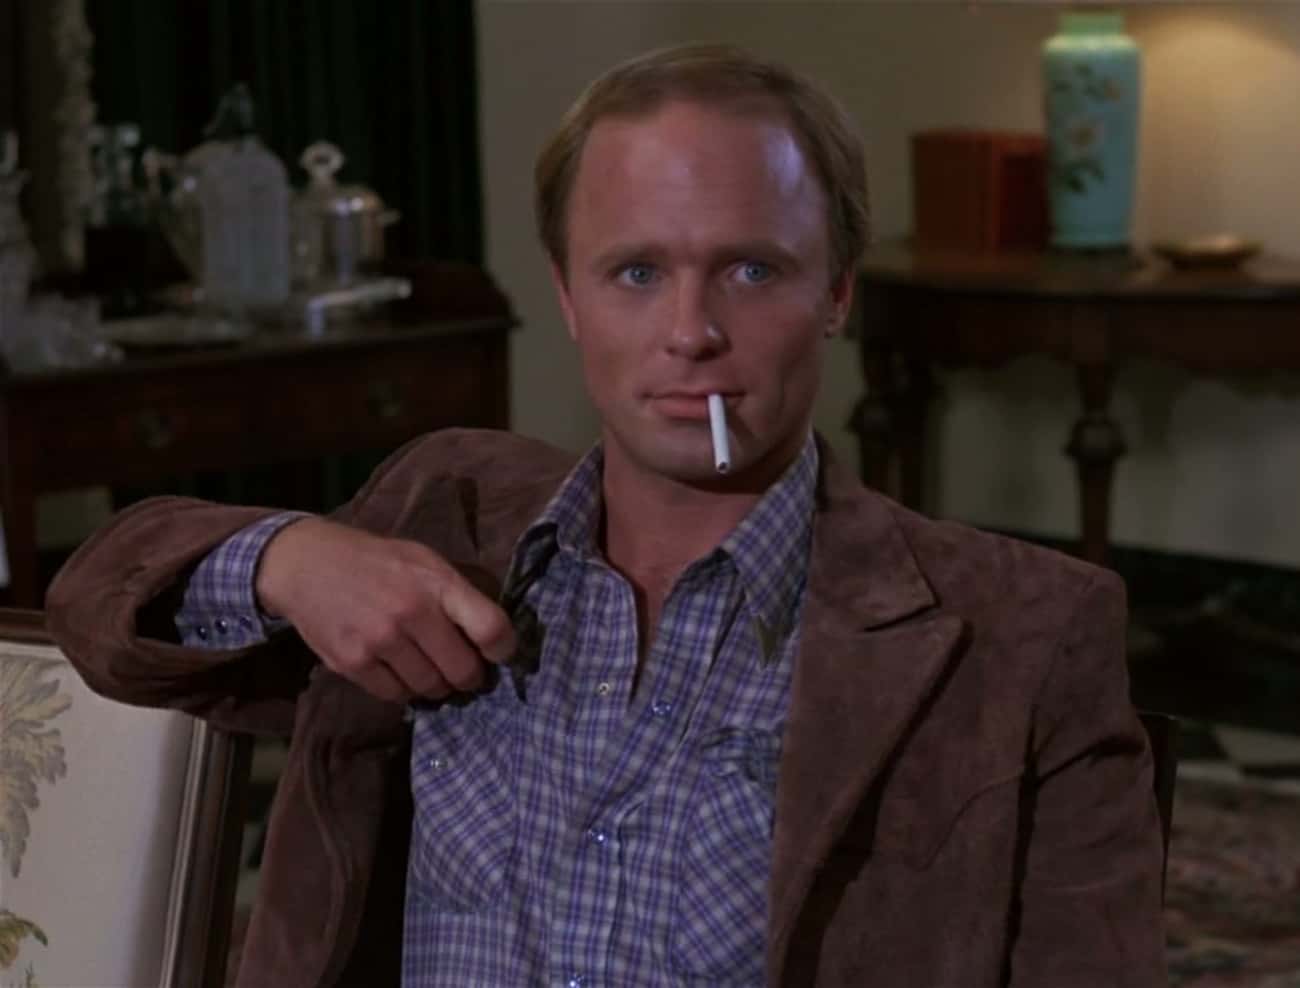 Young Ed Harris in Plaid Buttondown Smoking Cigarette